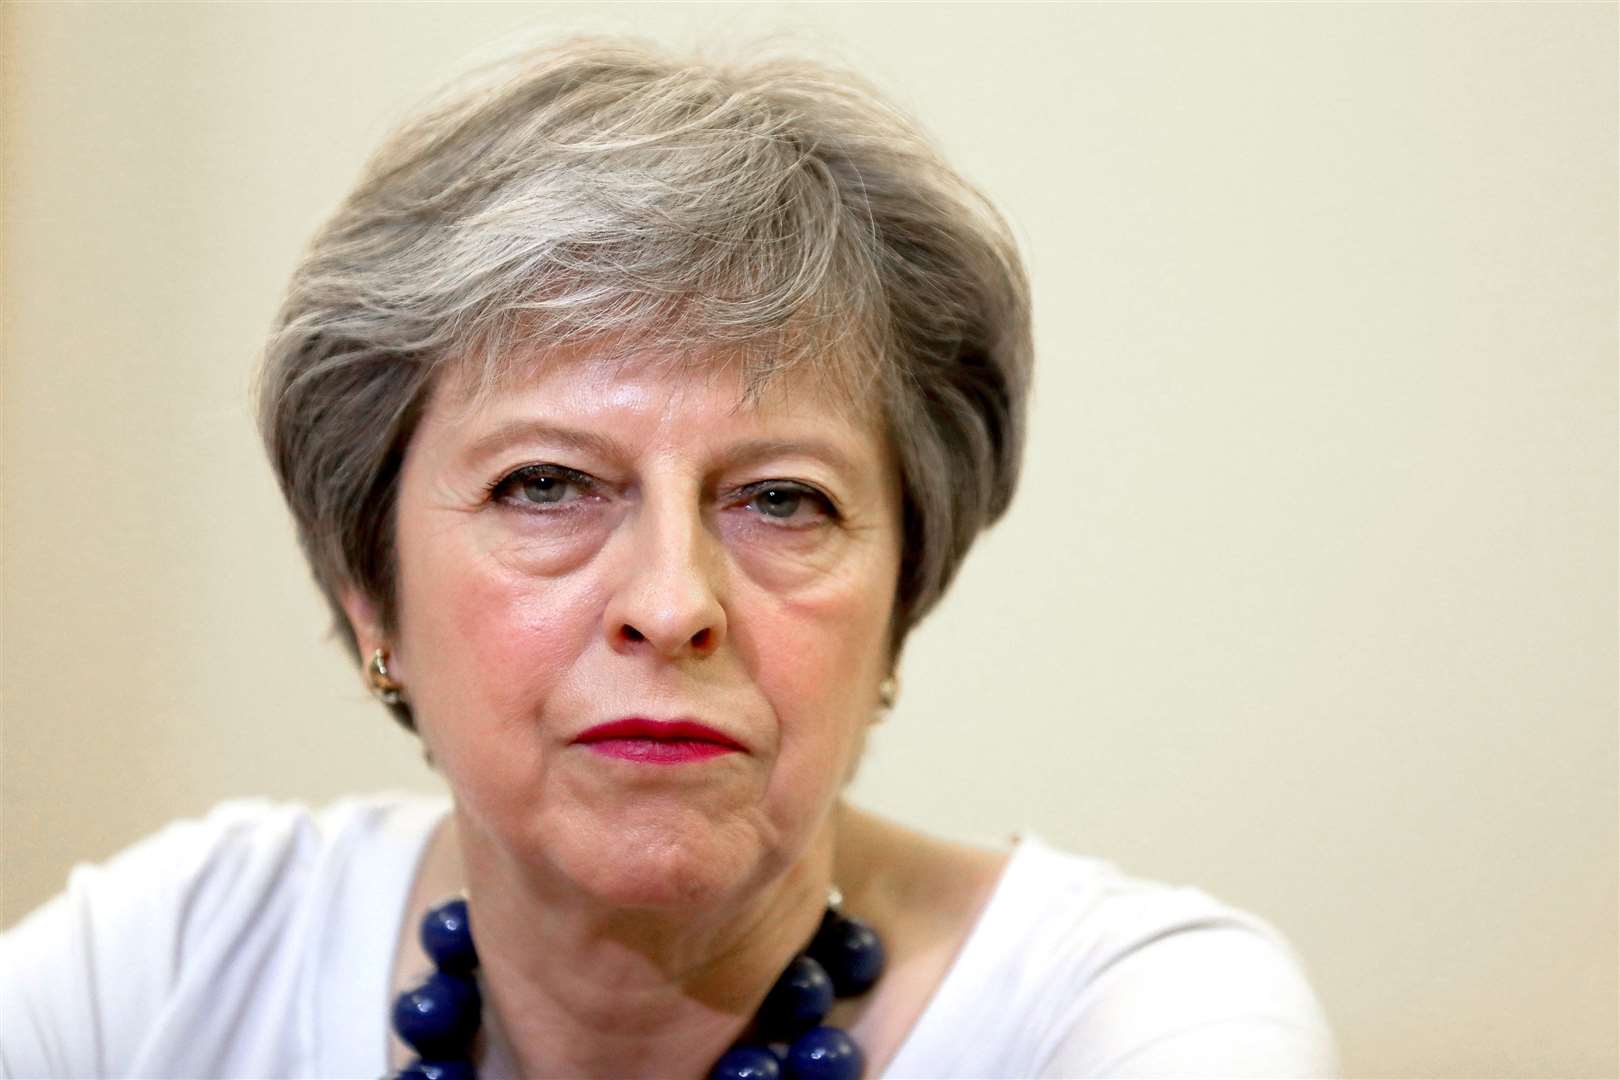 Prime Minister Theresa May is facing calls to resign